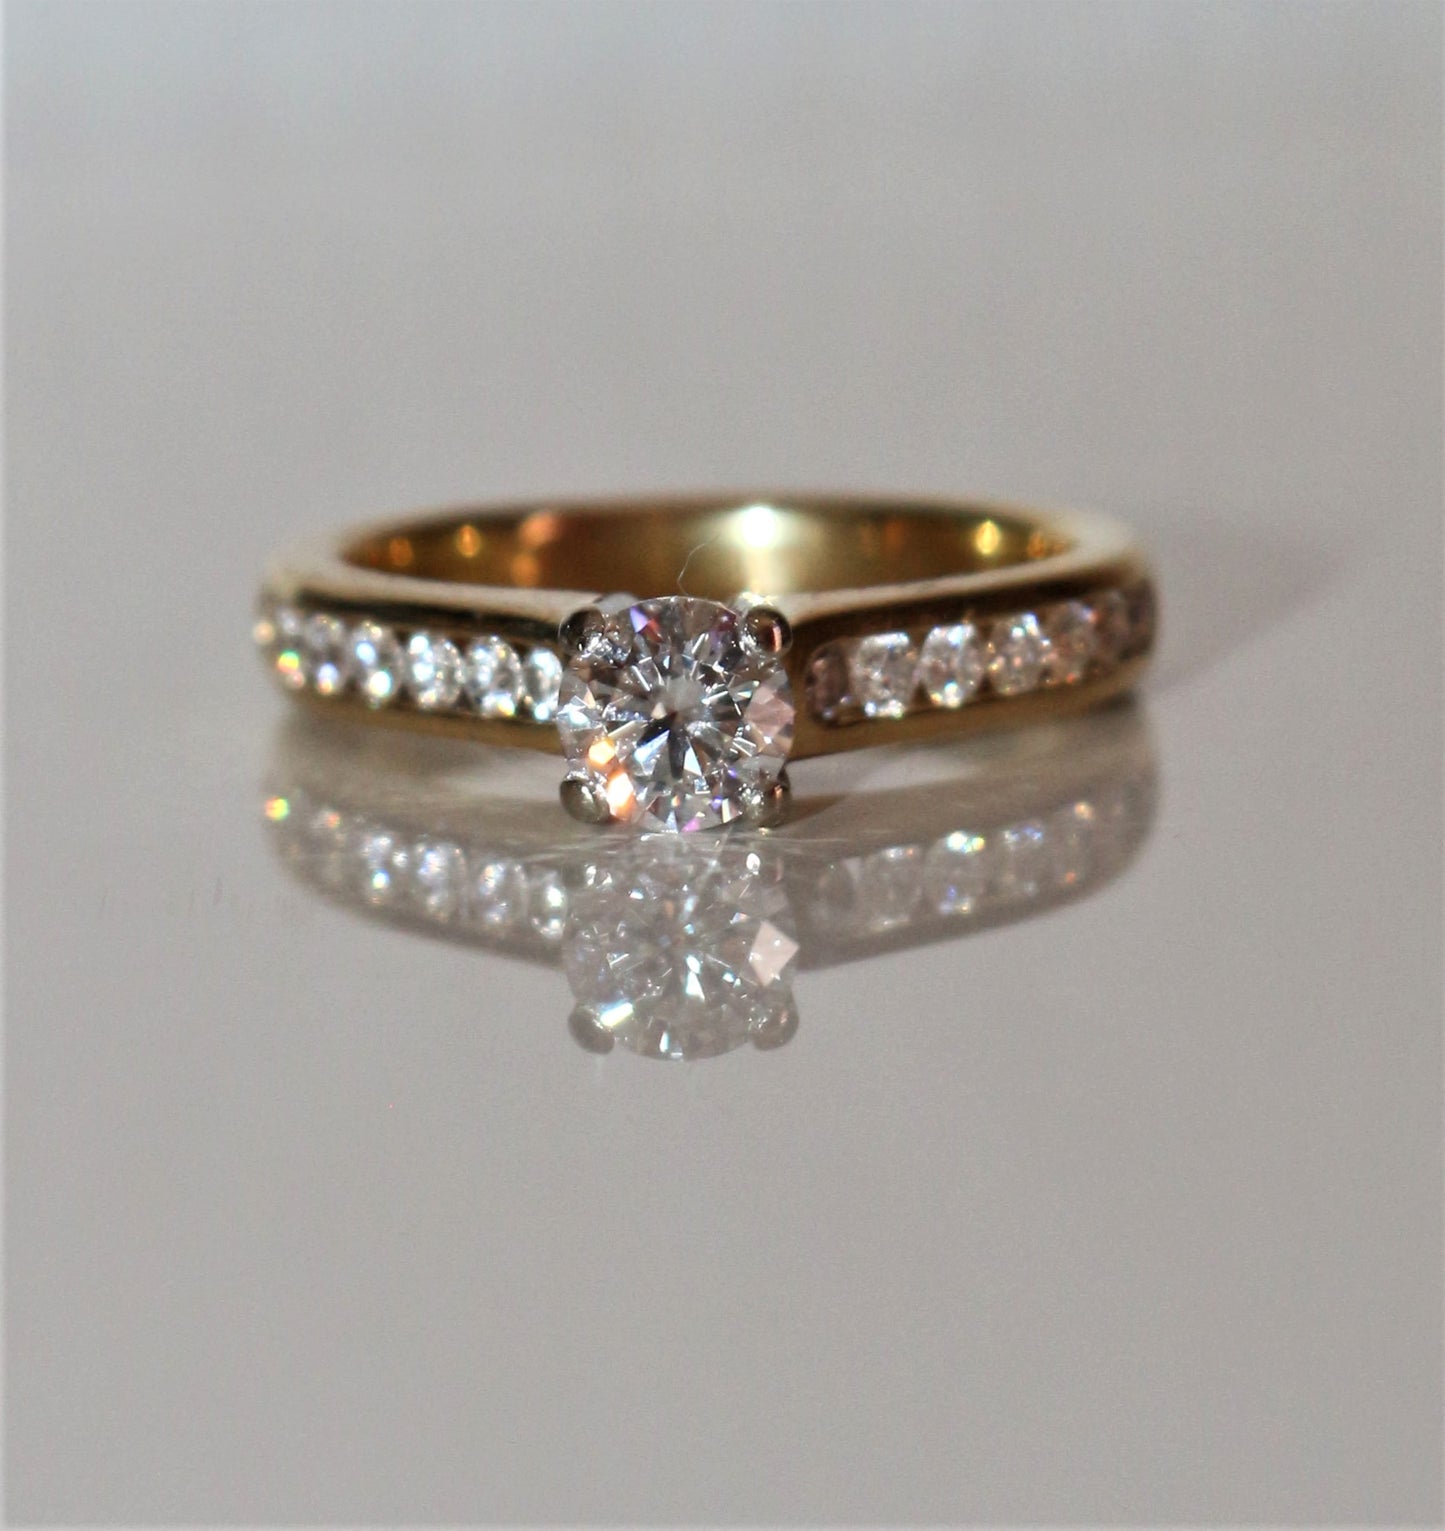 Birks brand solitaire ring